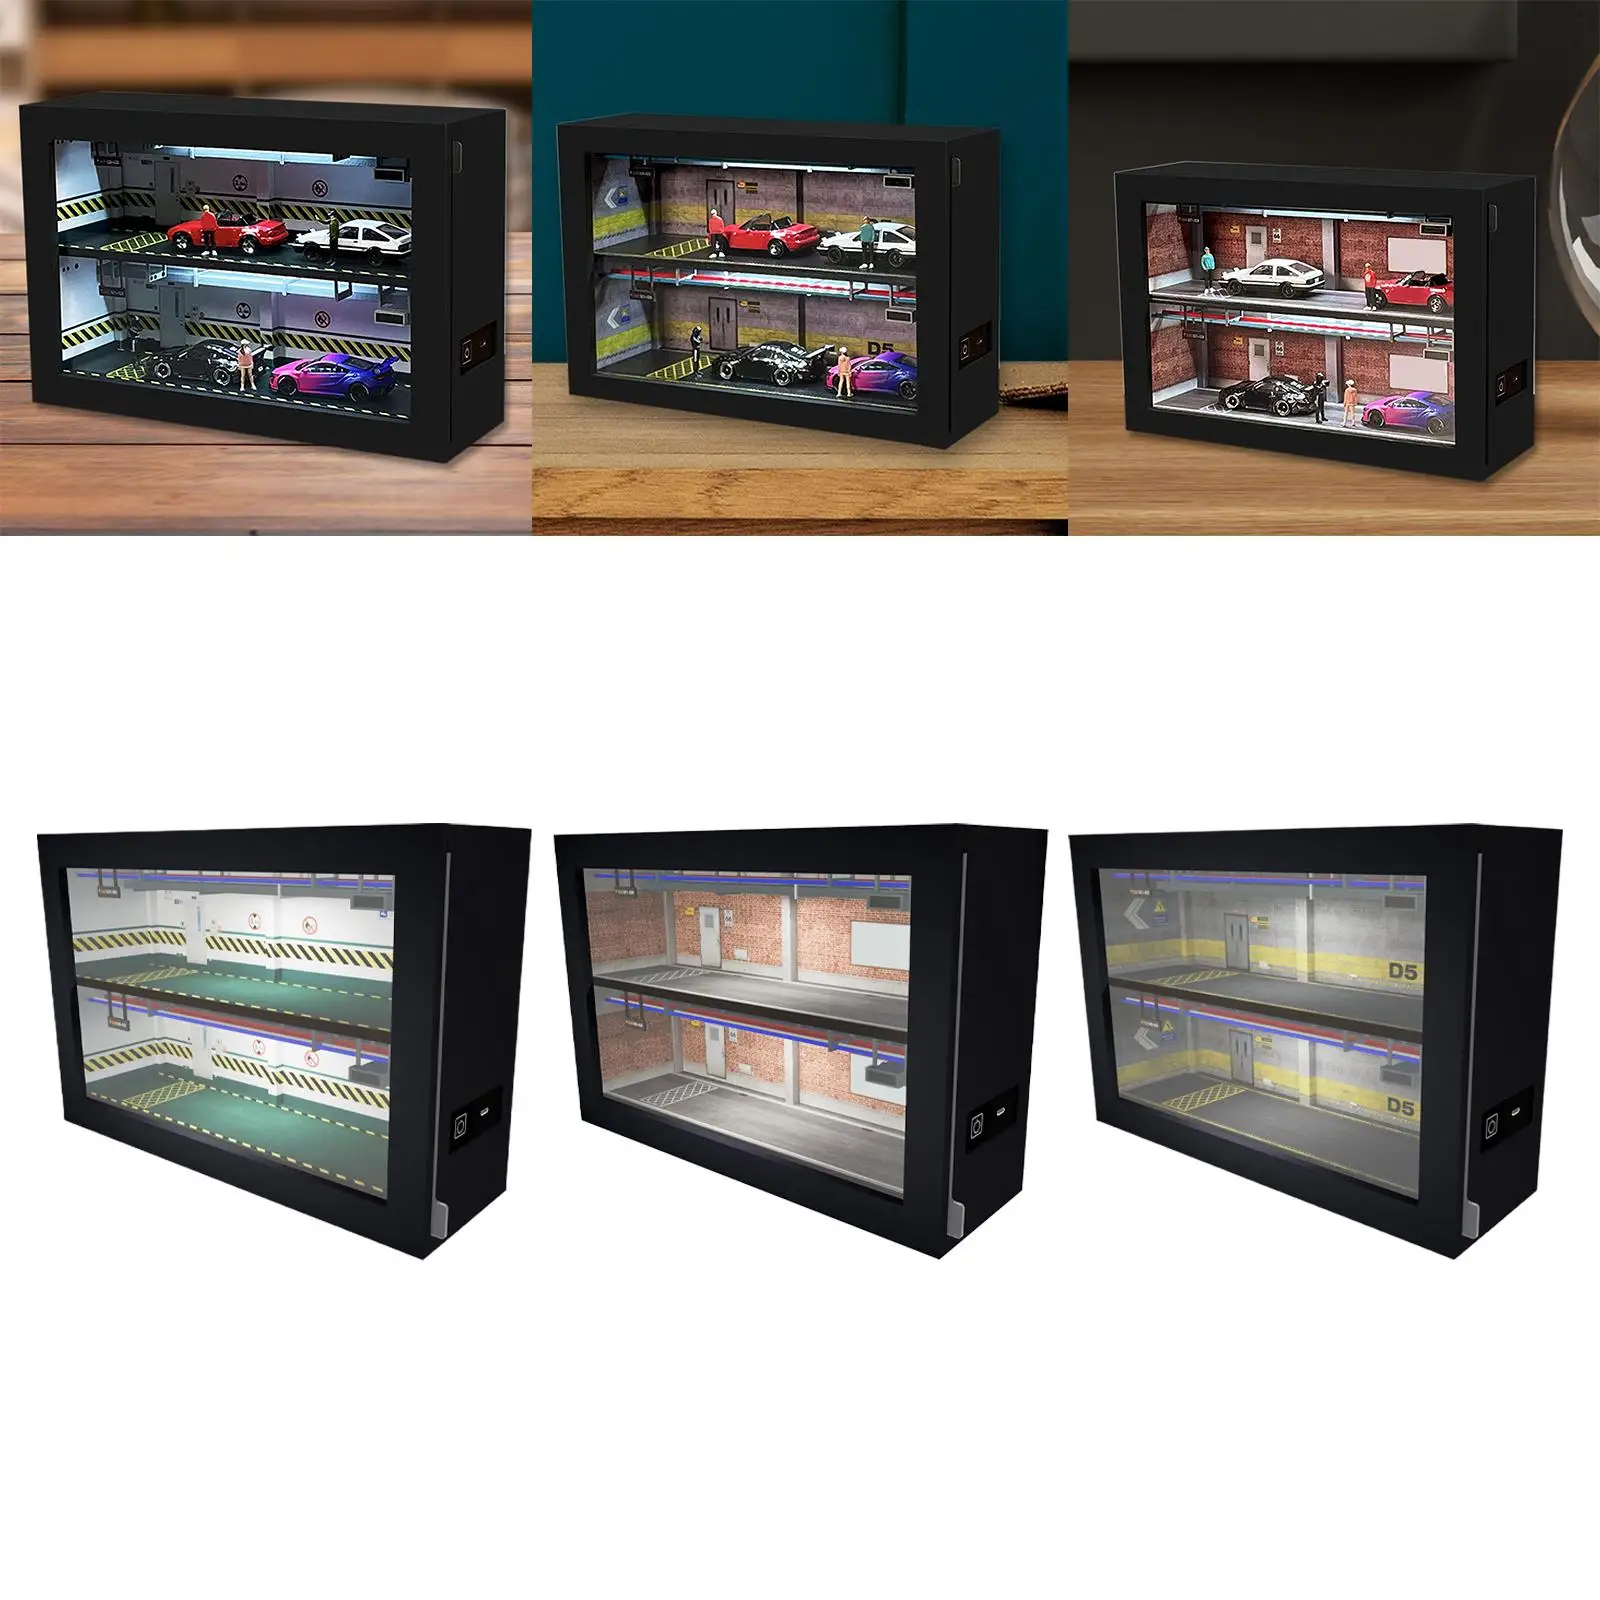 1/64 Scale Garage Display Case Ornament 2 Tier Clear with LED Showcase Storage Box for Bookshelf Car Models Study Collectibles